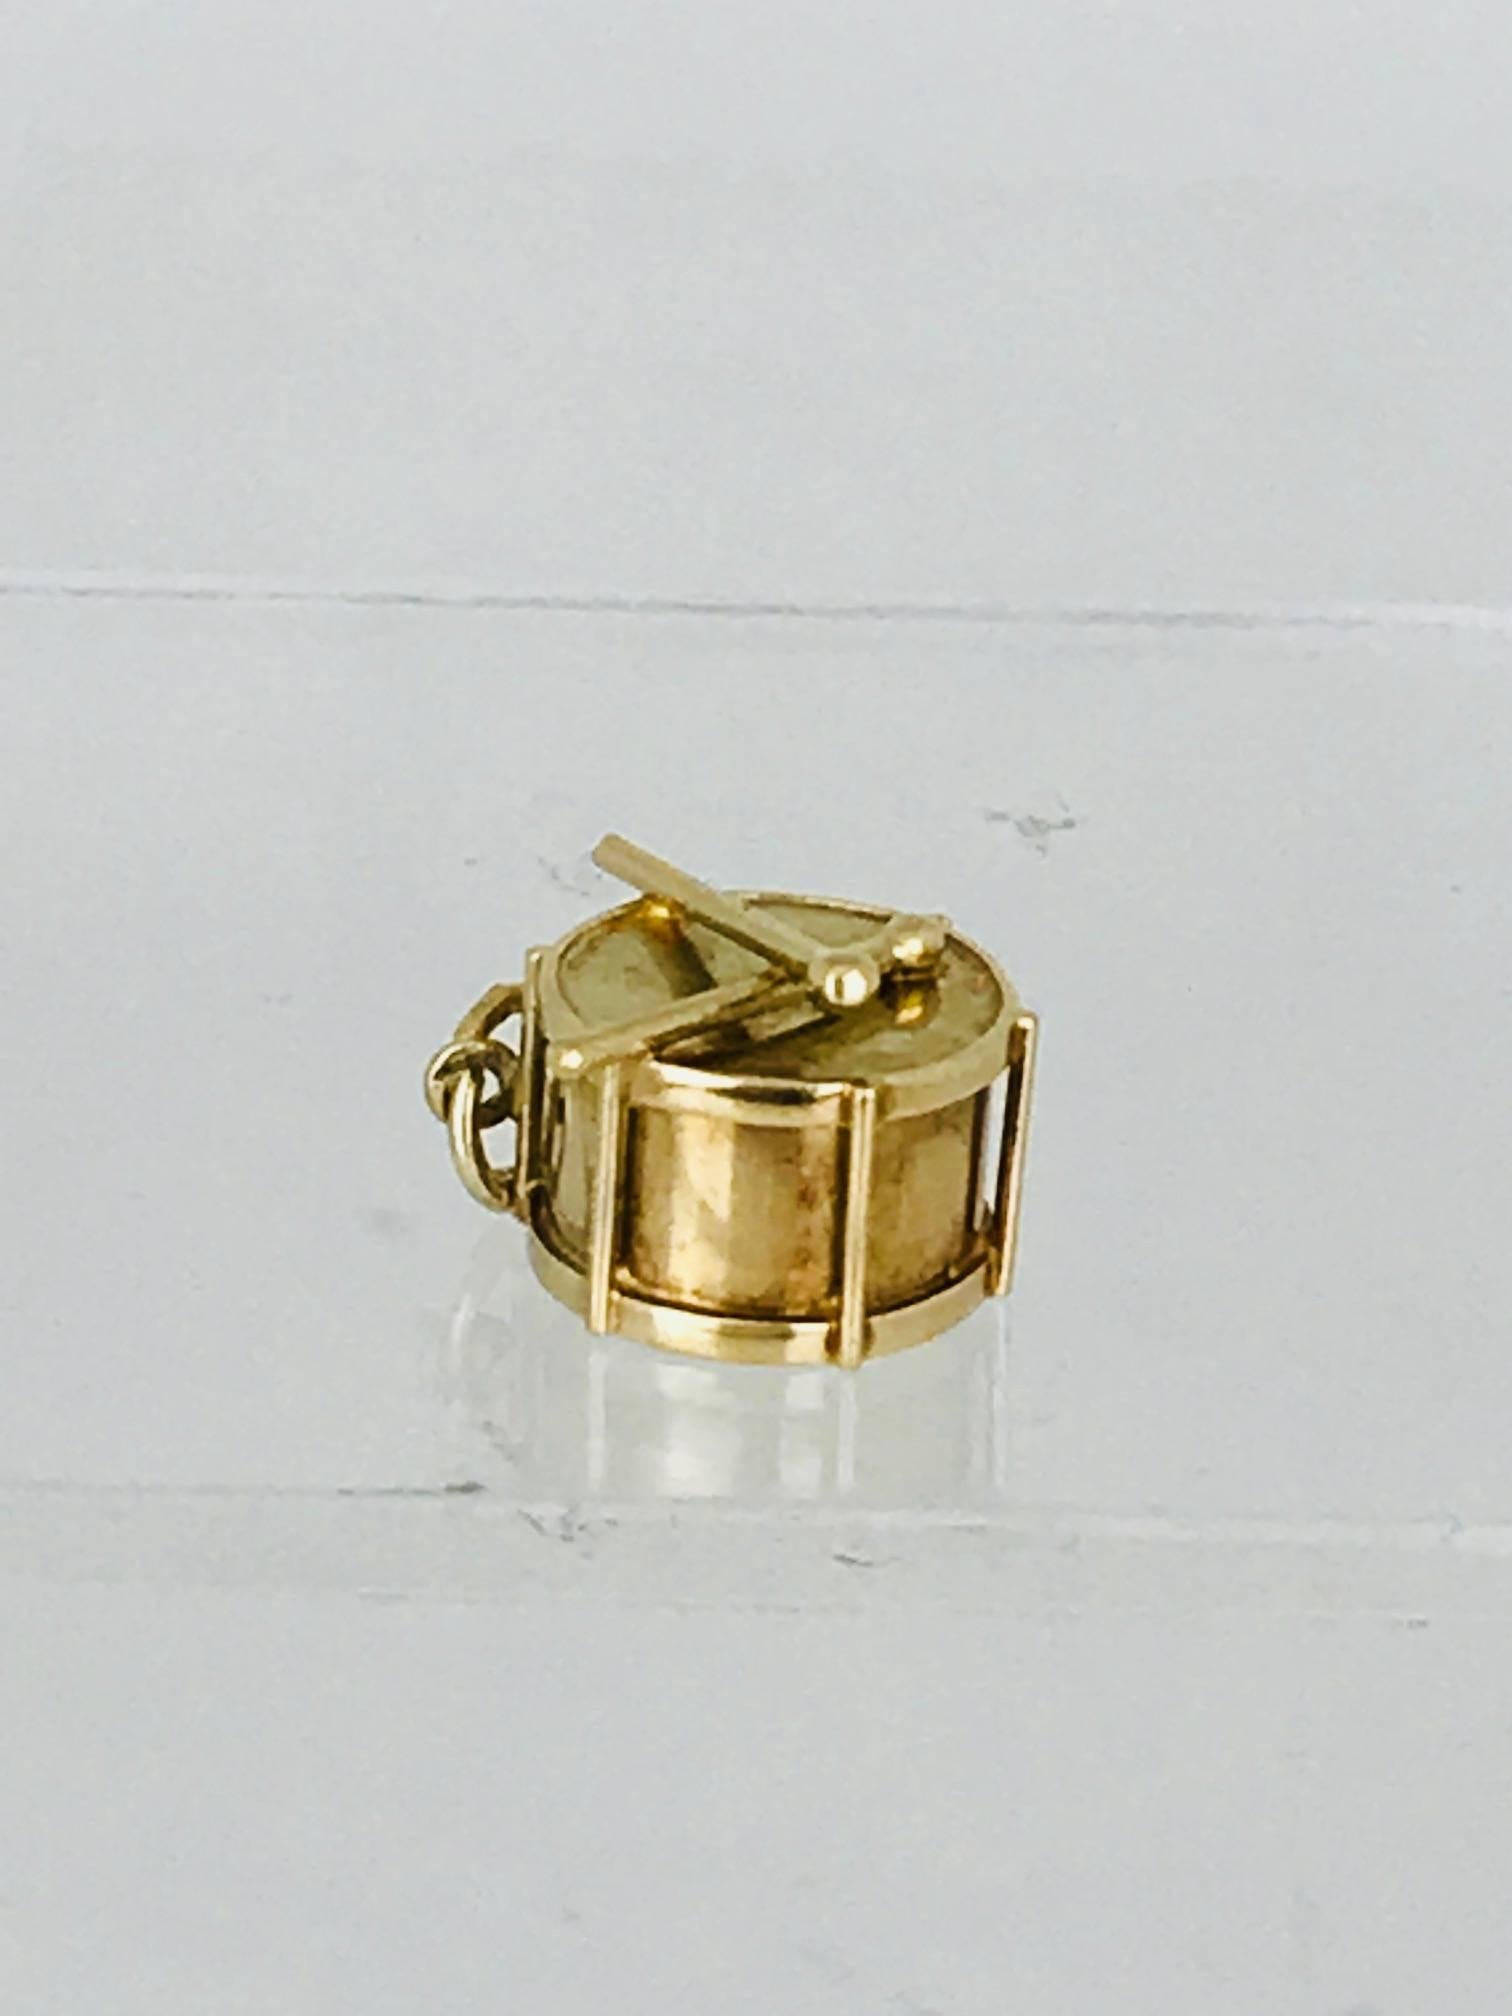 Drum Charm, 14 Karat Gold, Handmade circa 1950 In Excellent Condition For Sale In Aliso Viejo, CA